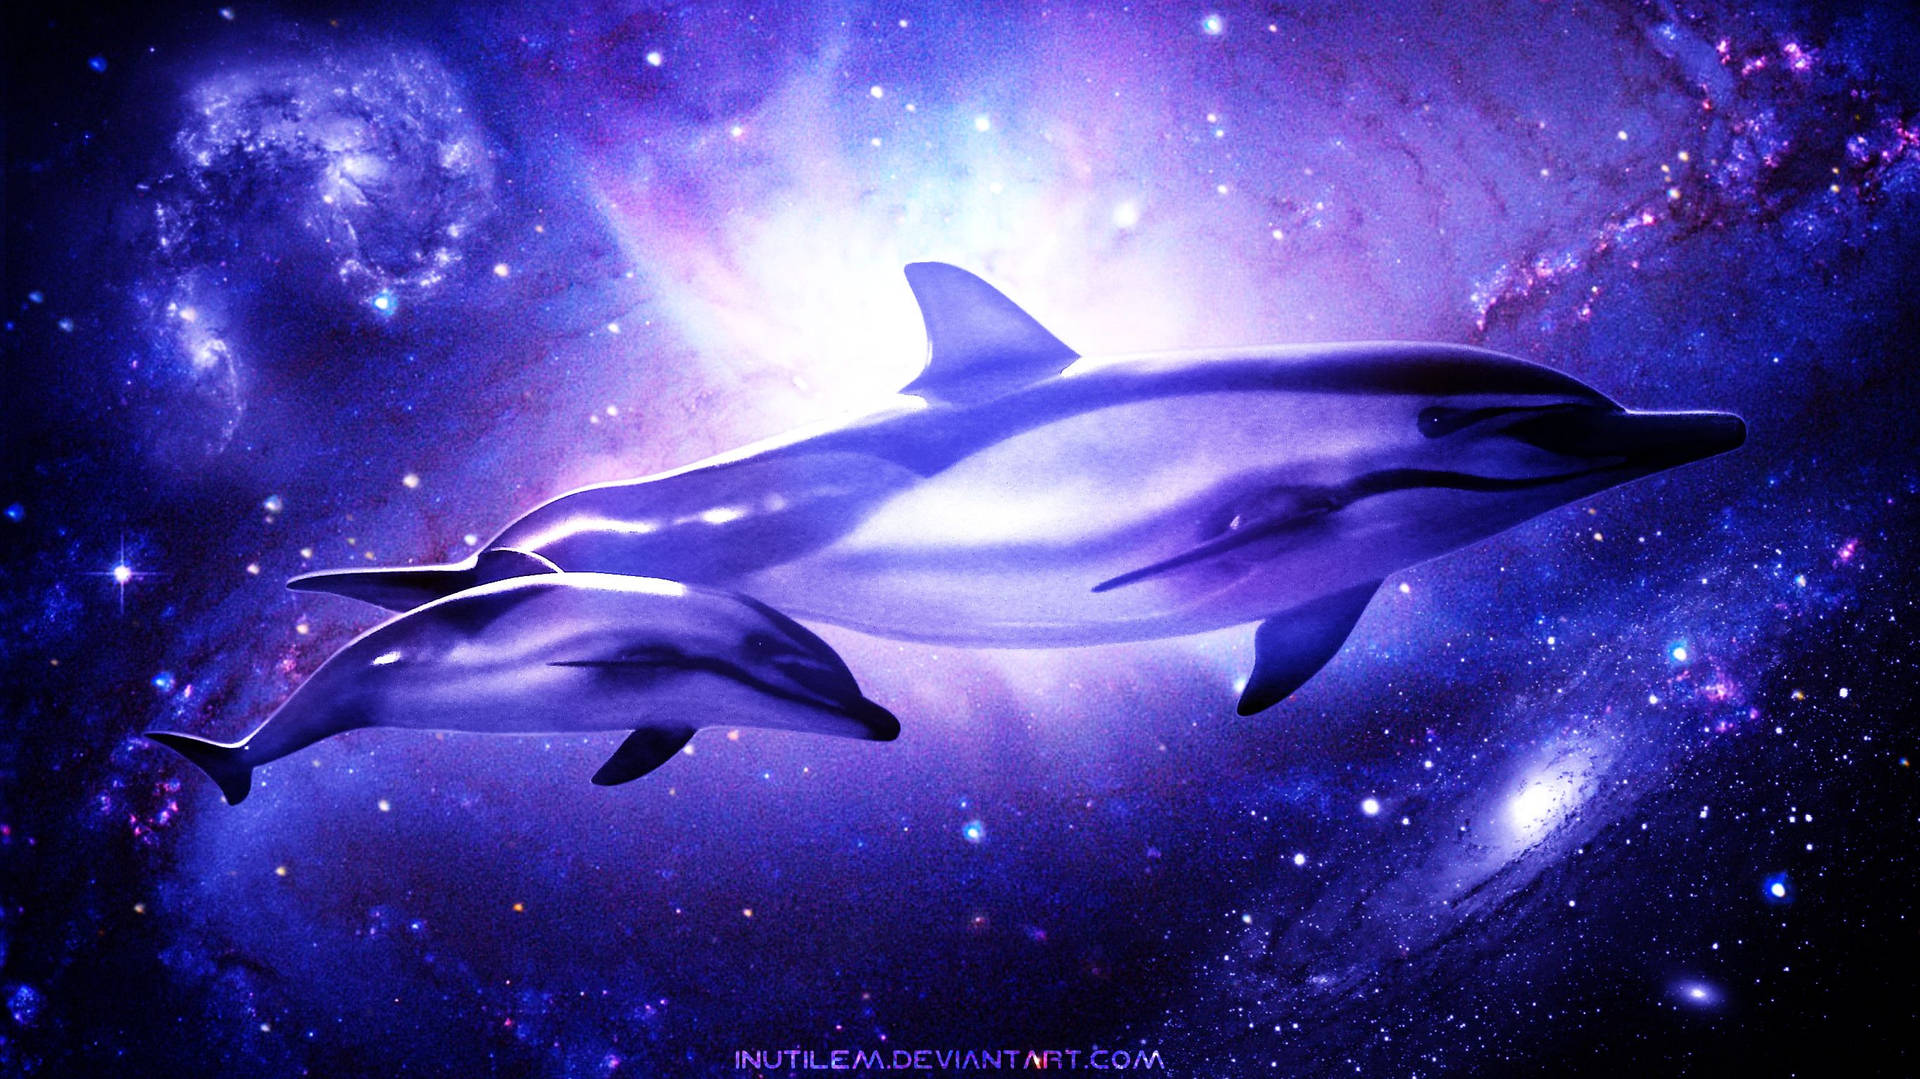 Dolphin Back Grounds Wallpapers